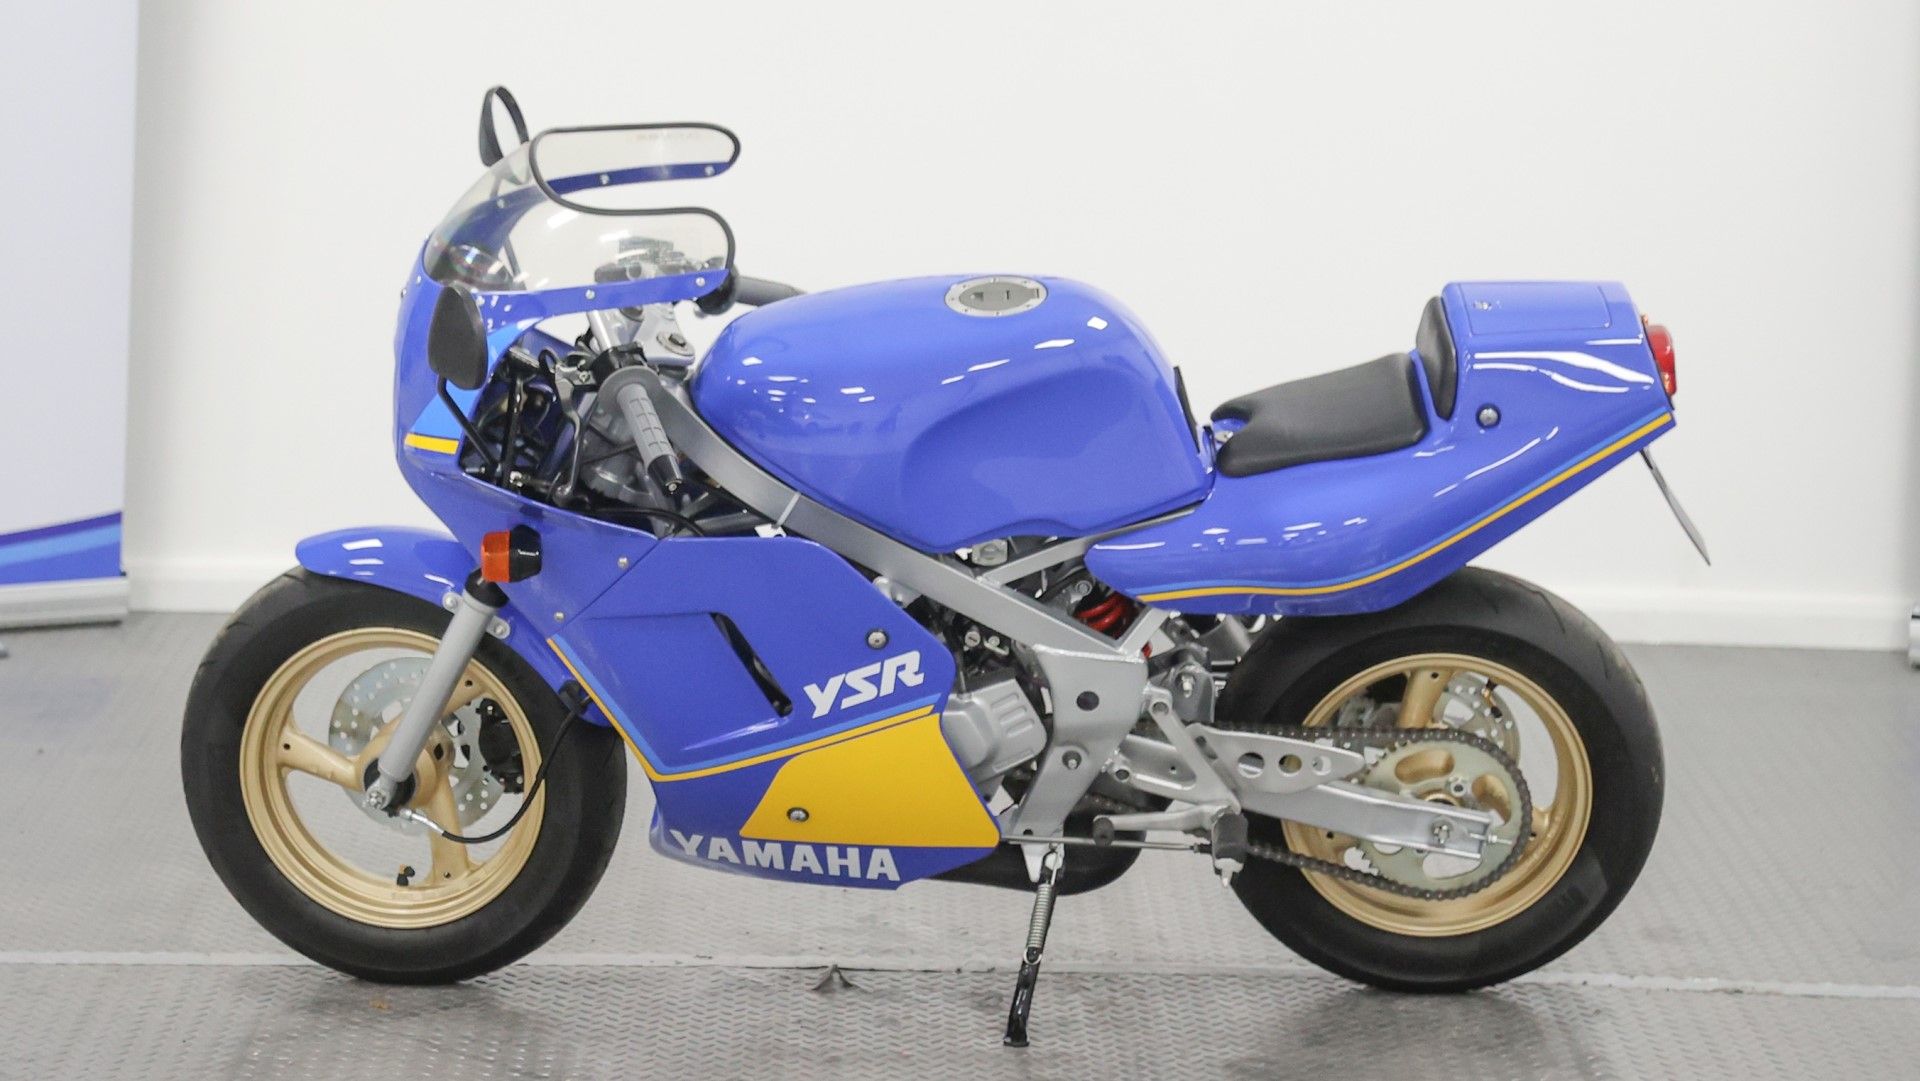 Here's Why The Yamaha YSR80 Is A Desirable 80s Sport Bike